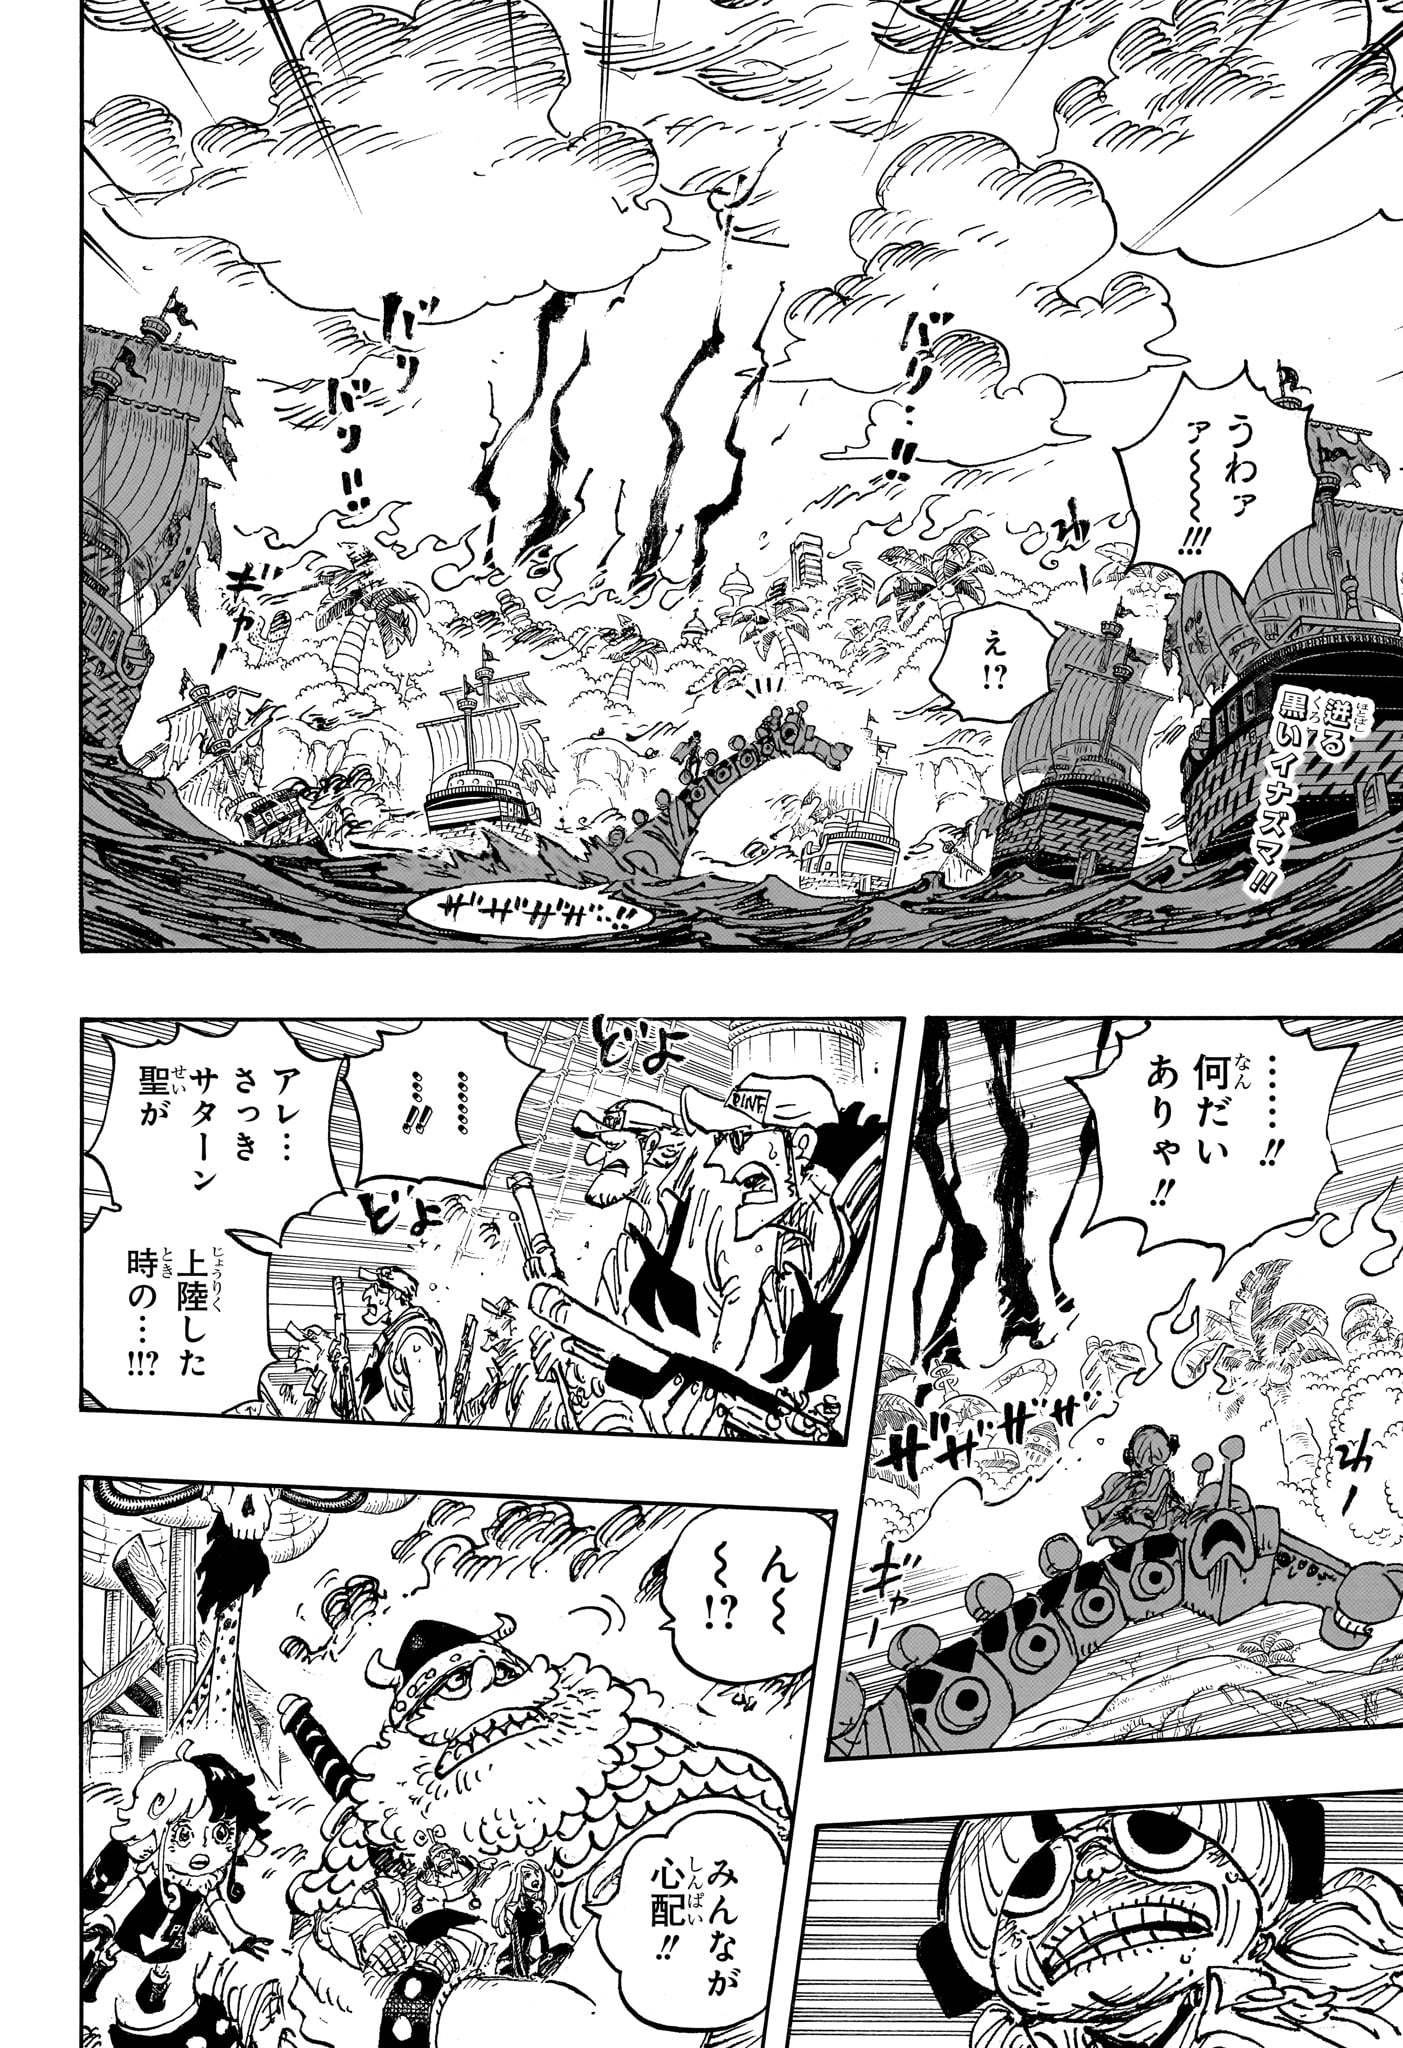 One Piece - Chapter 1110 - Page 2